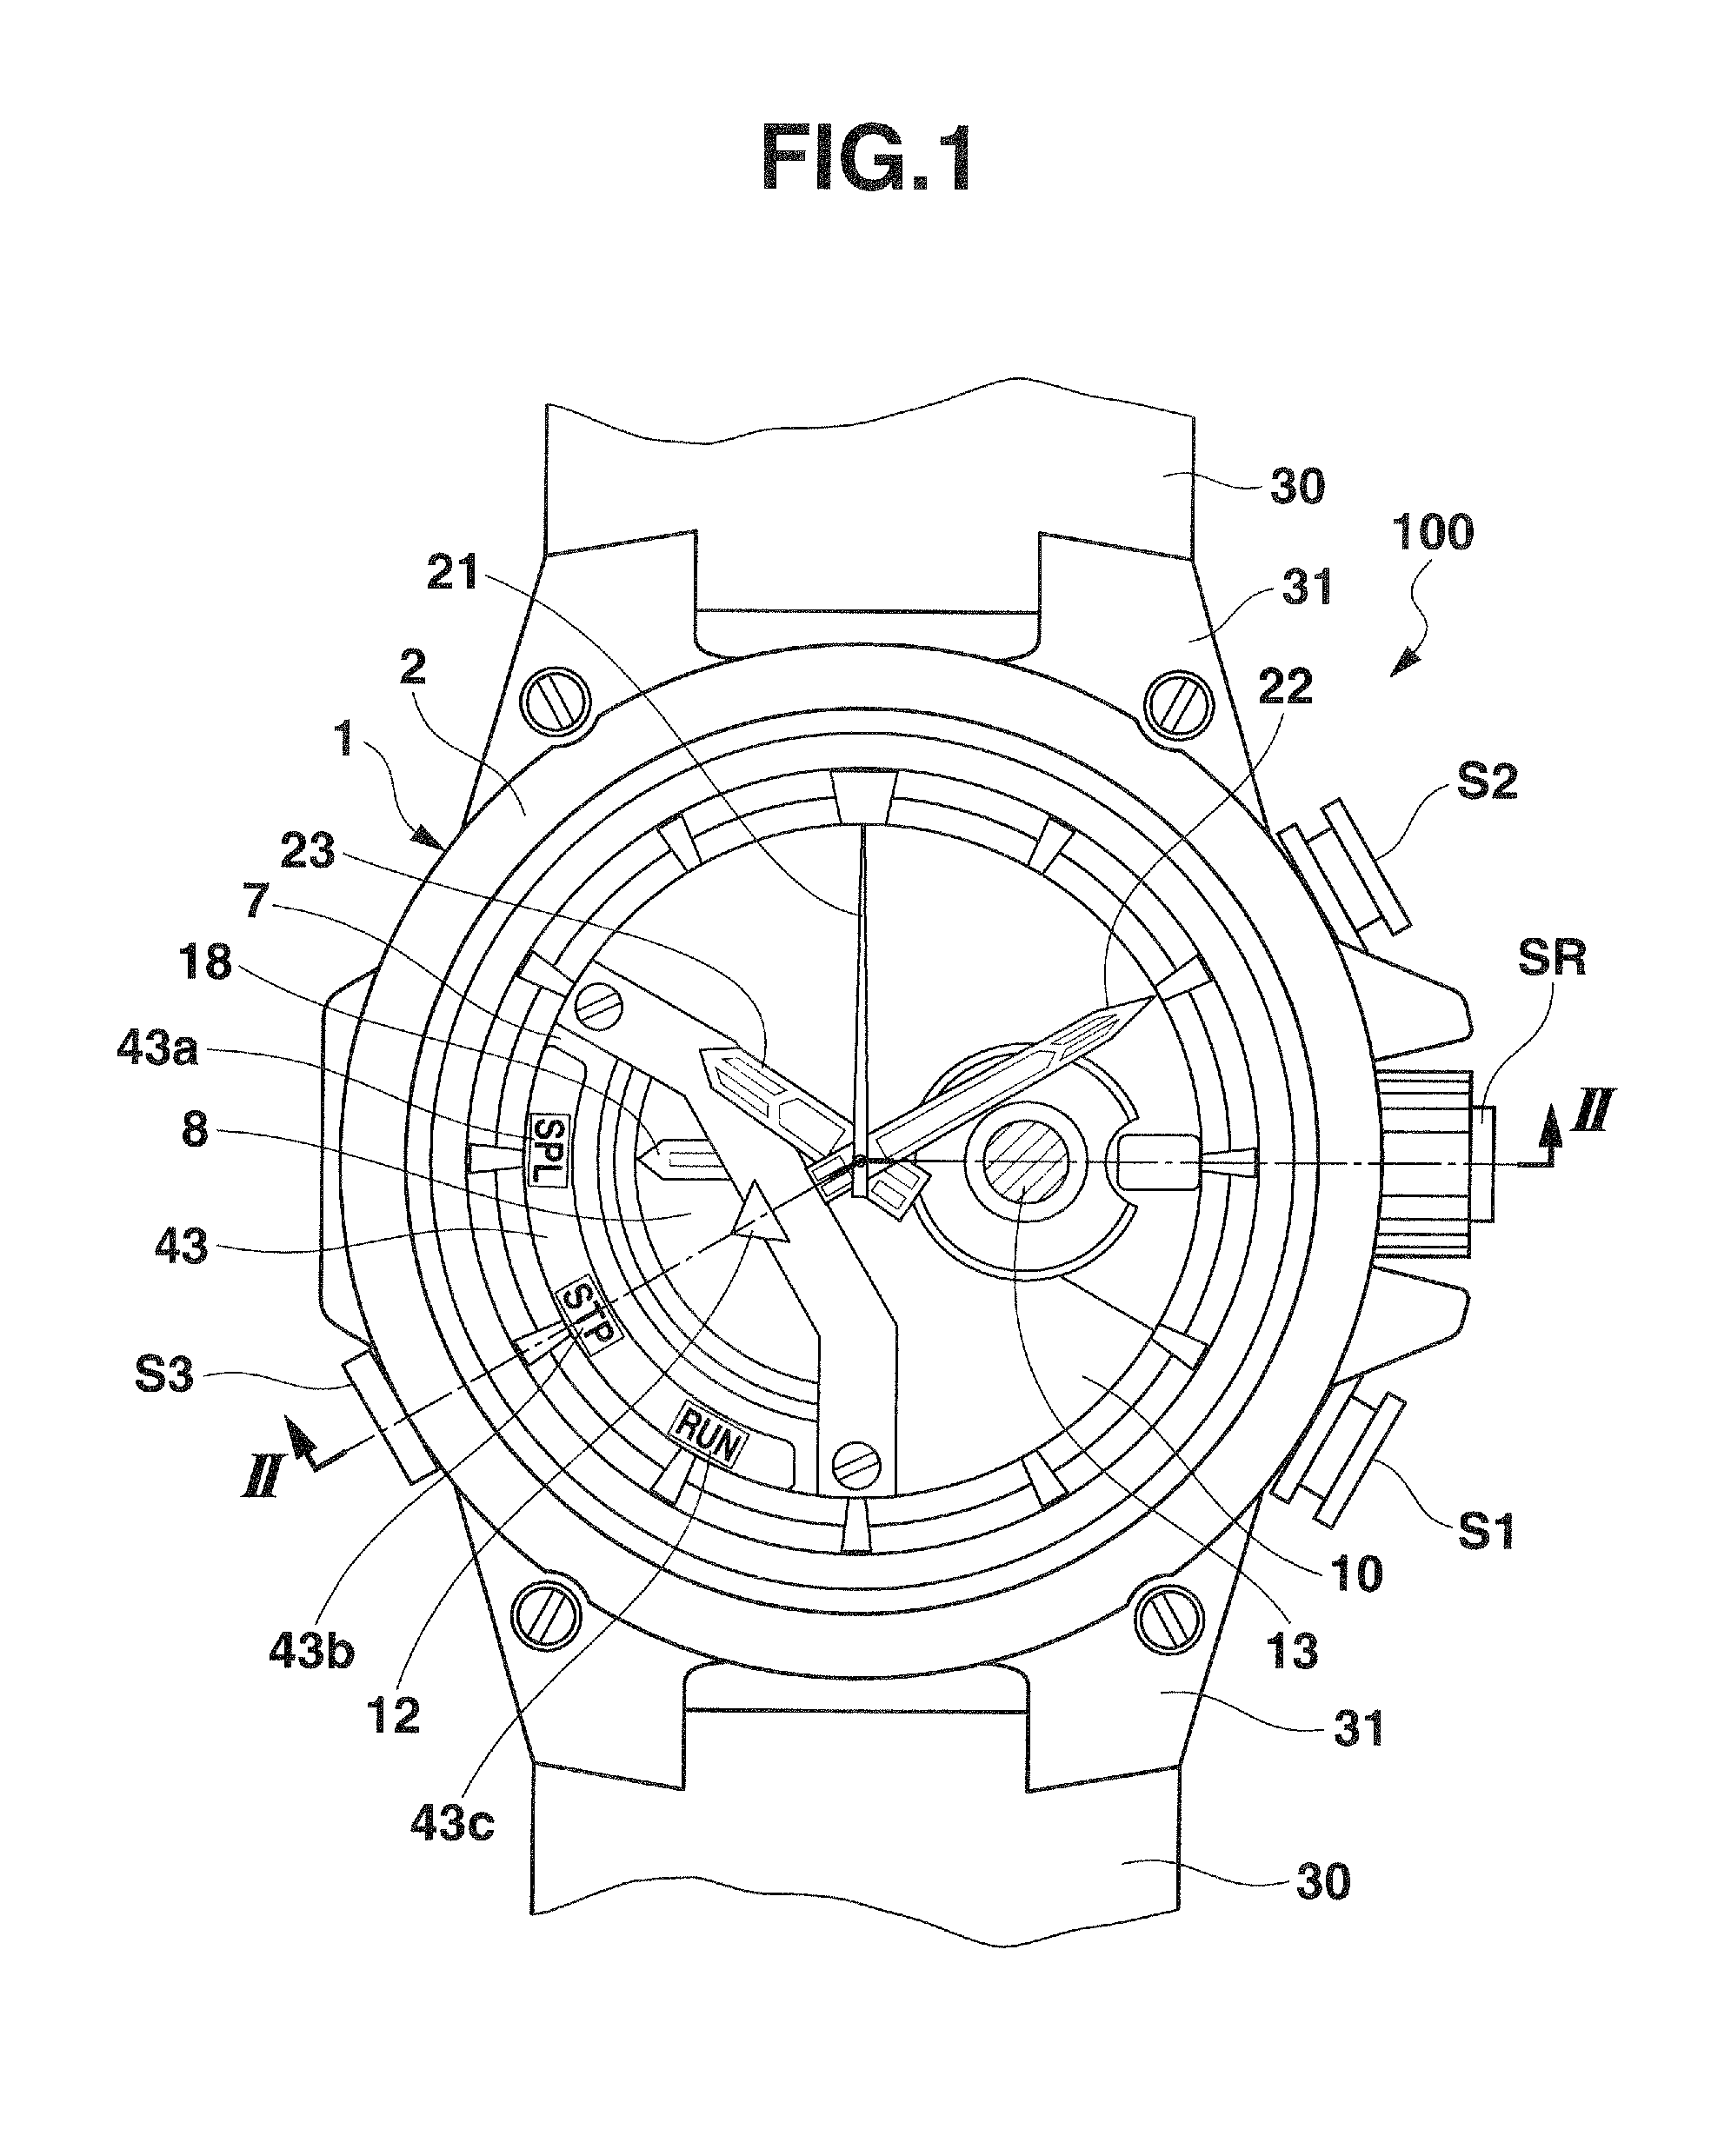 Dial plate structure and watch